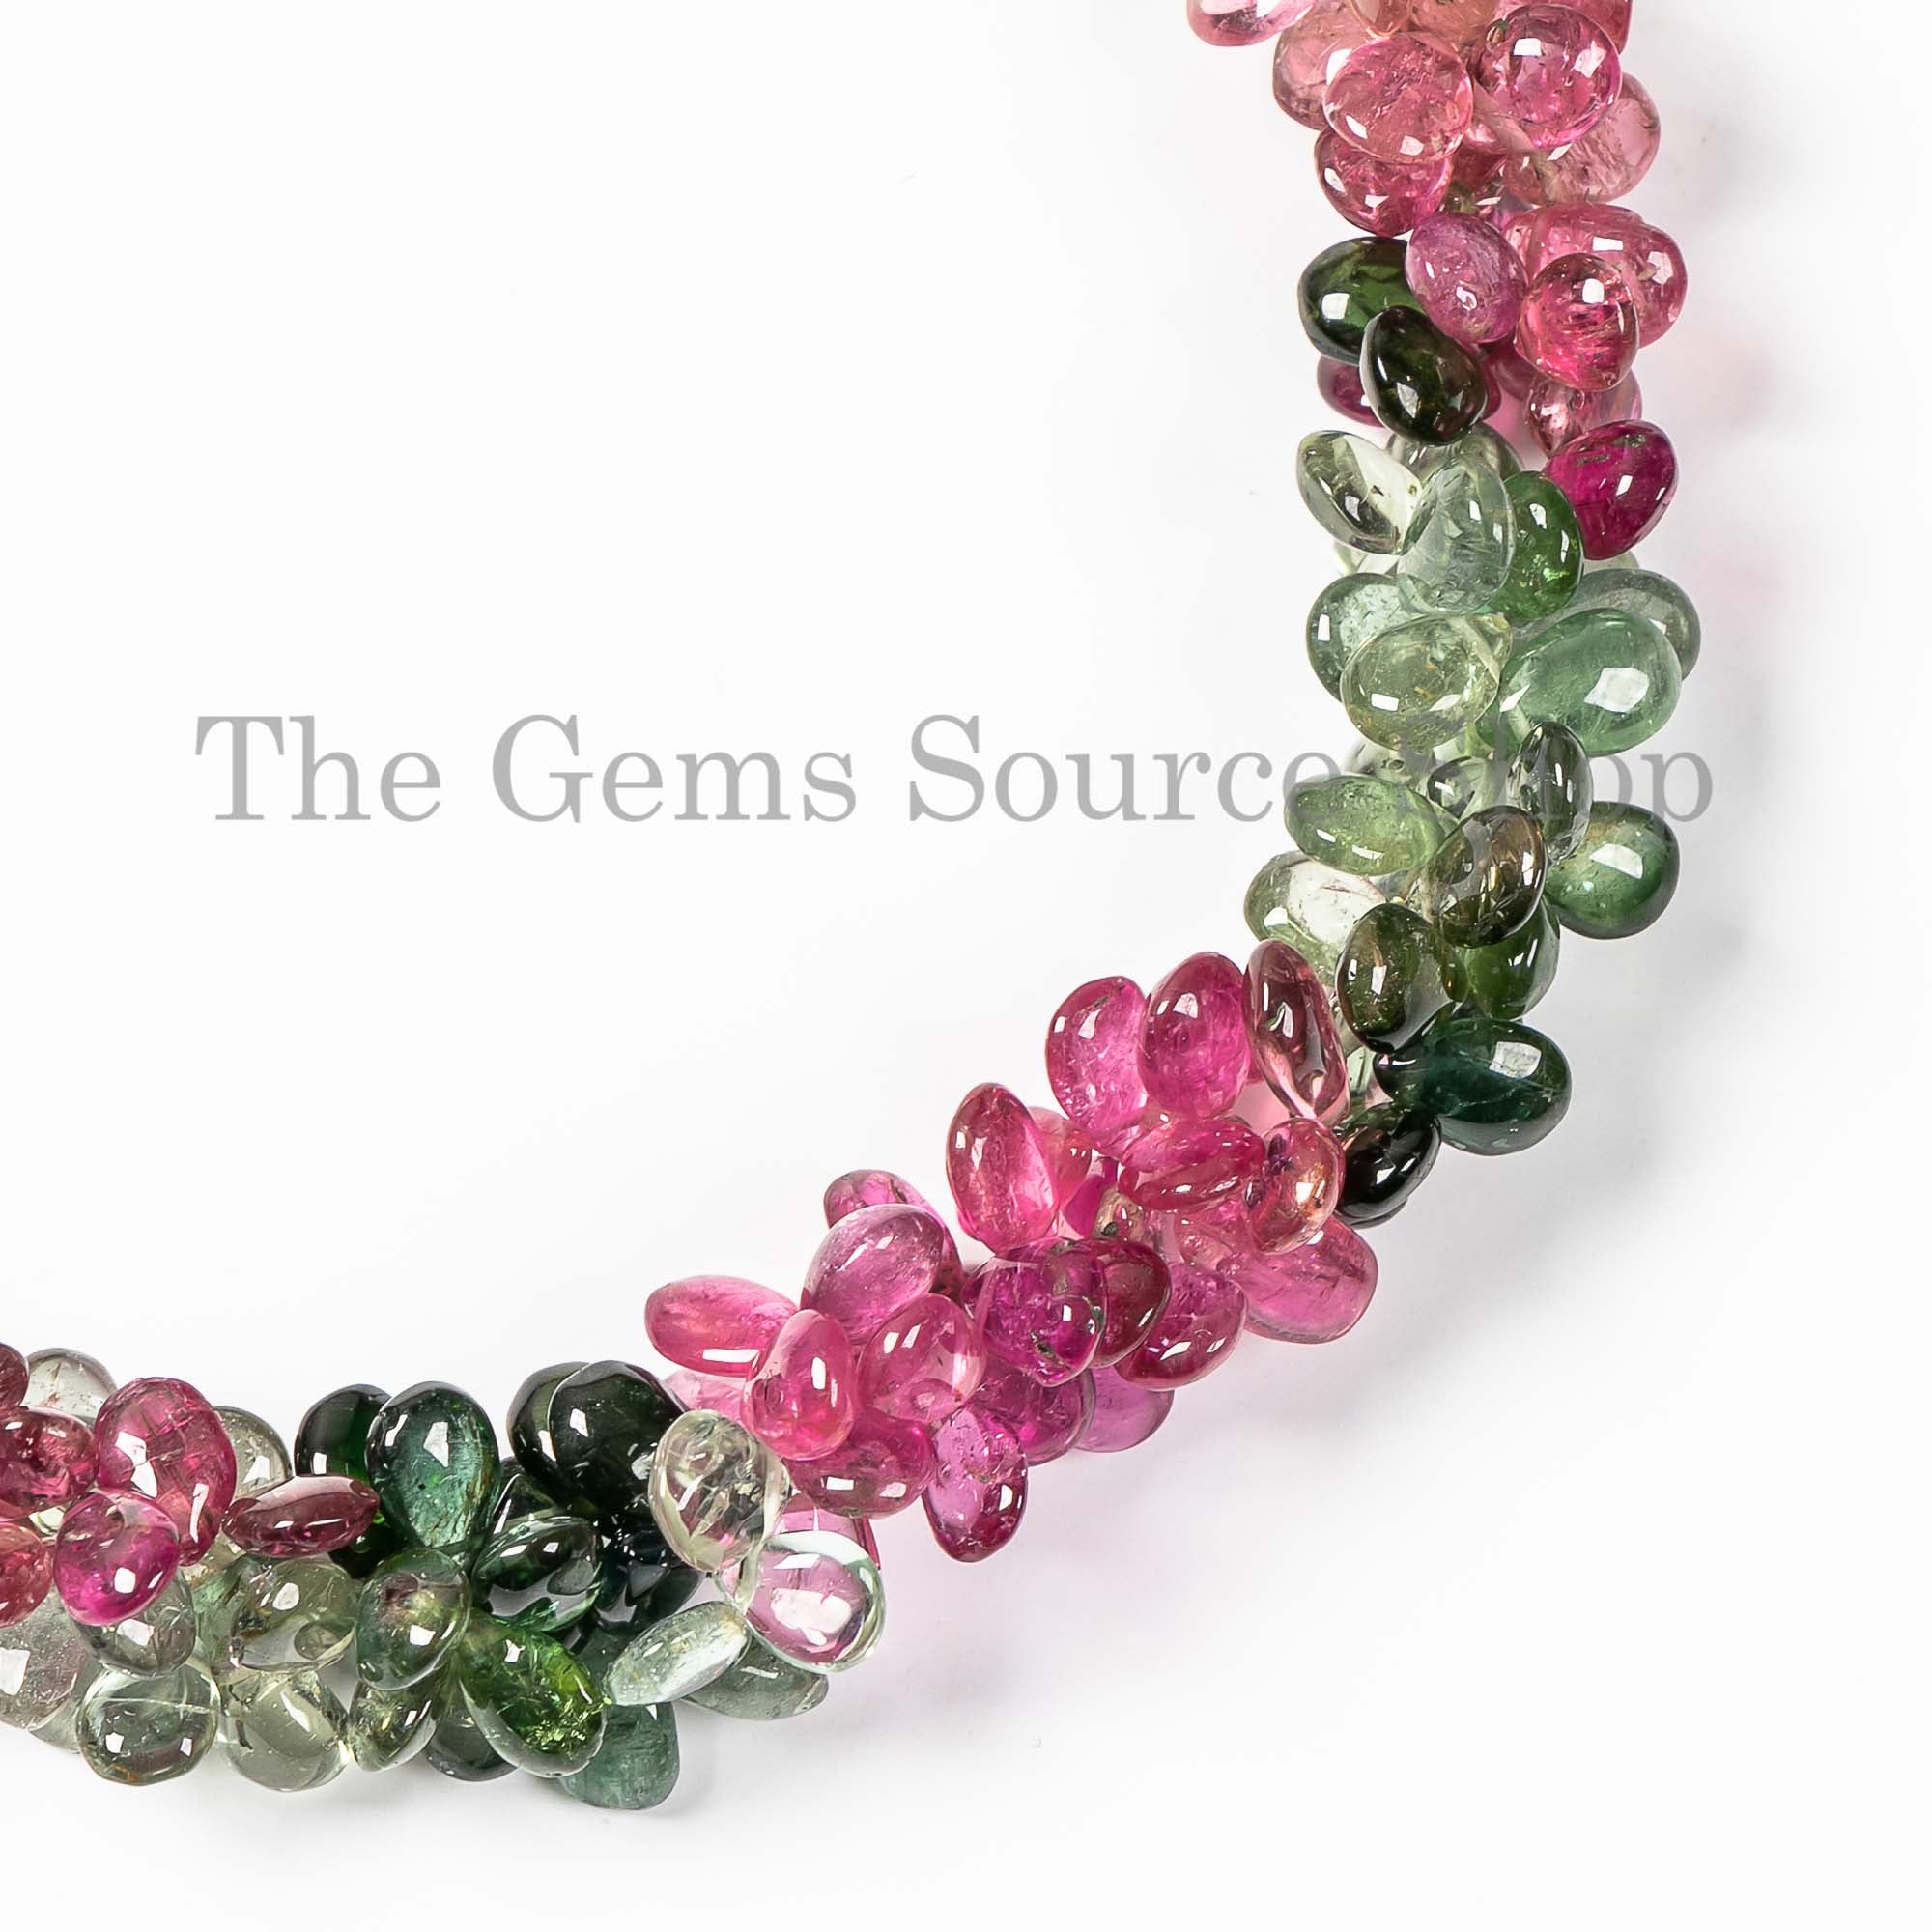 AAA Quality Tourmaline Beads Necklace Smooth Pear Beads Necklace, Gemstone Beads Necklace